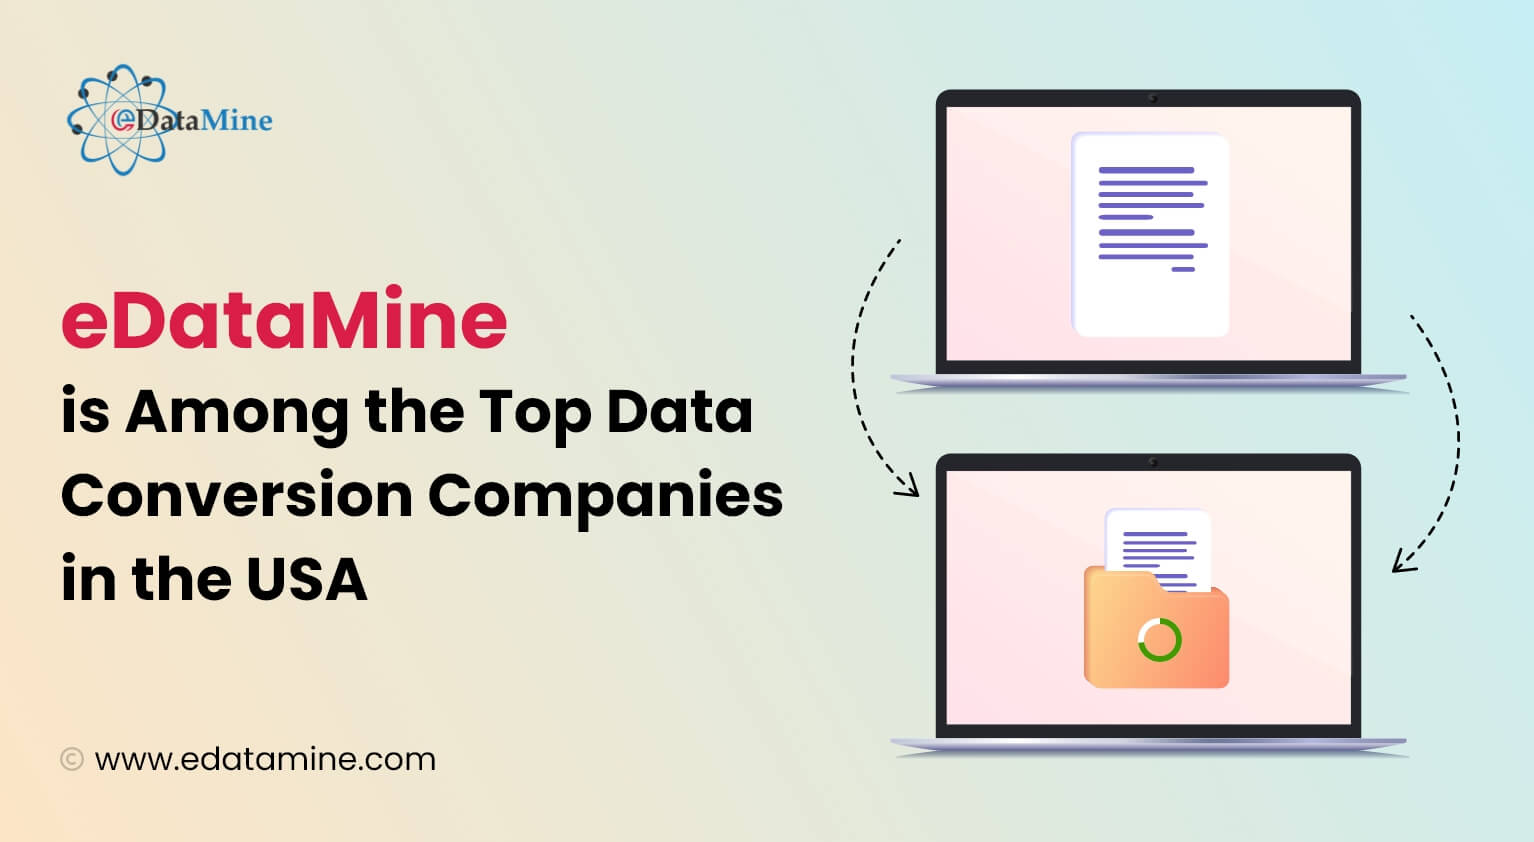 eDataMineis Among the Top Data Conversion Companies in the USA